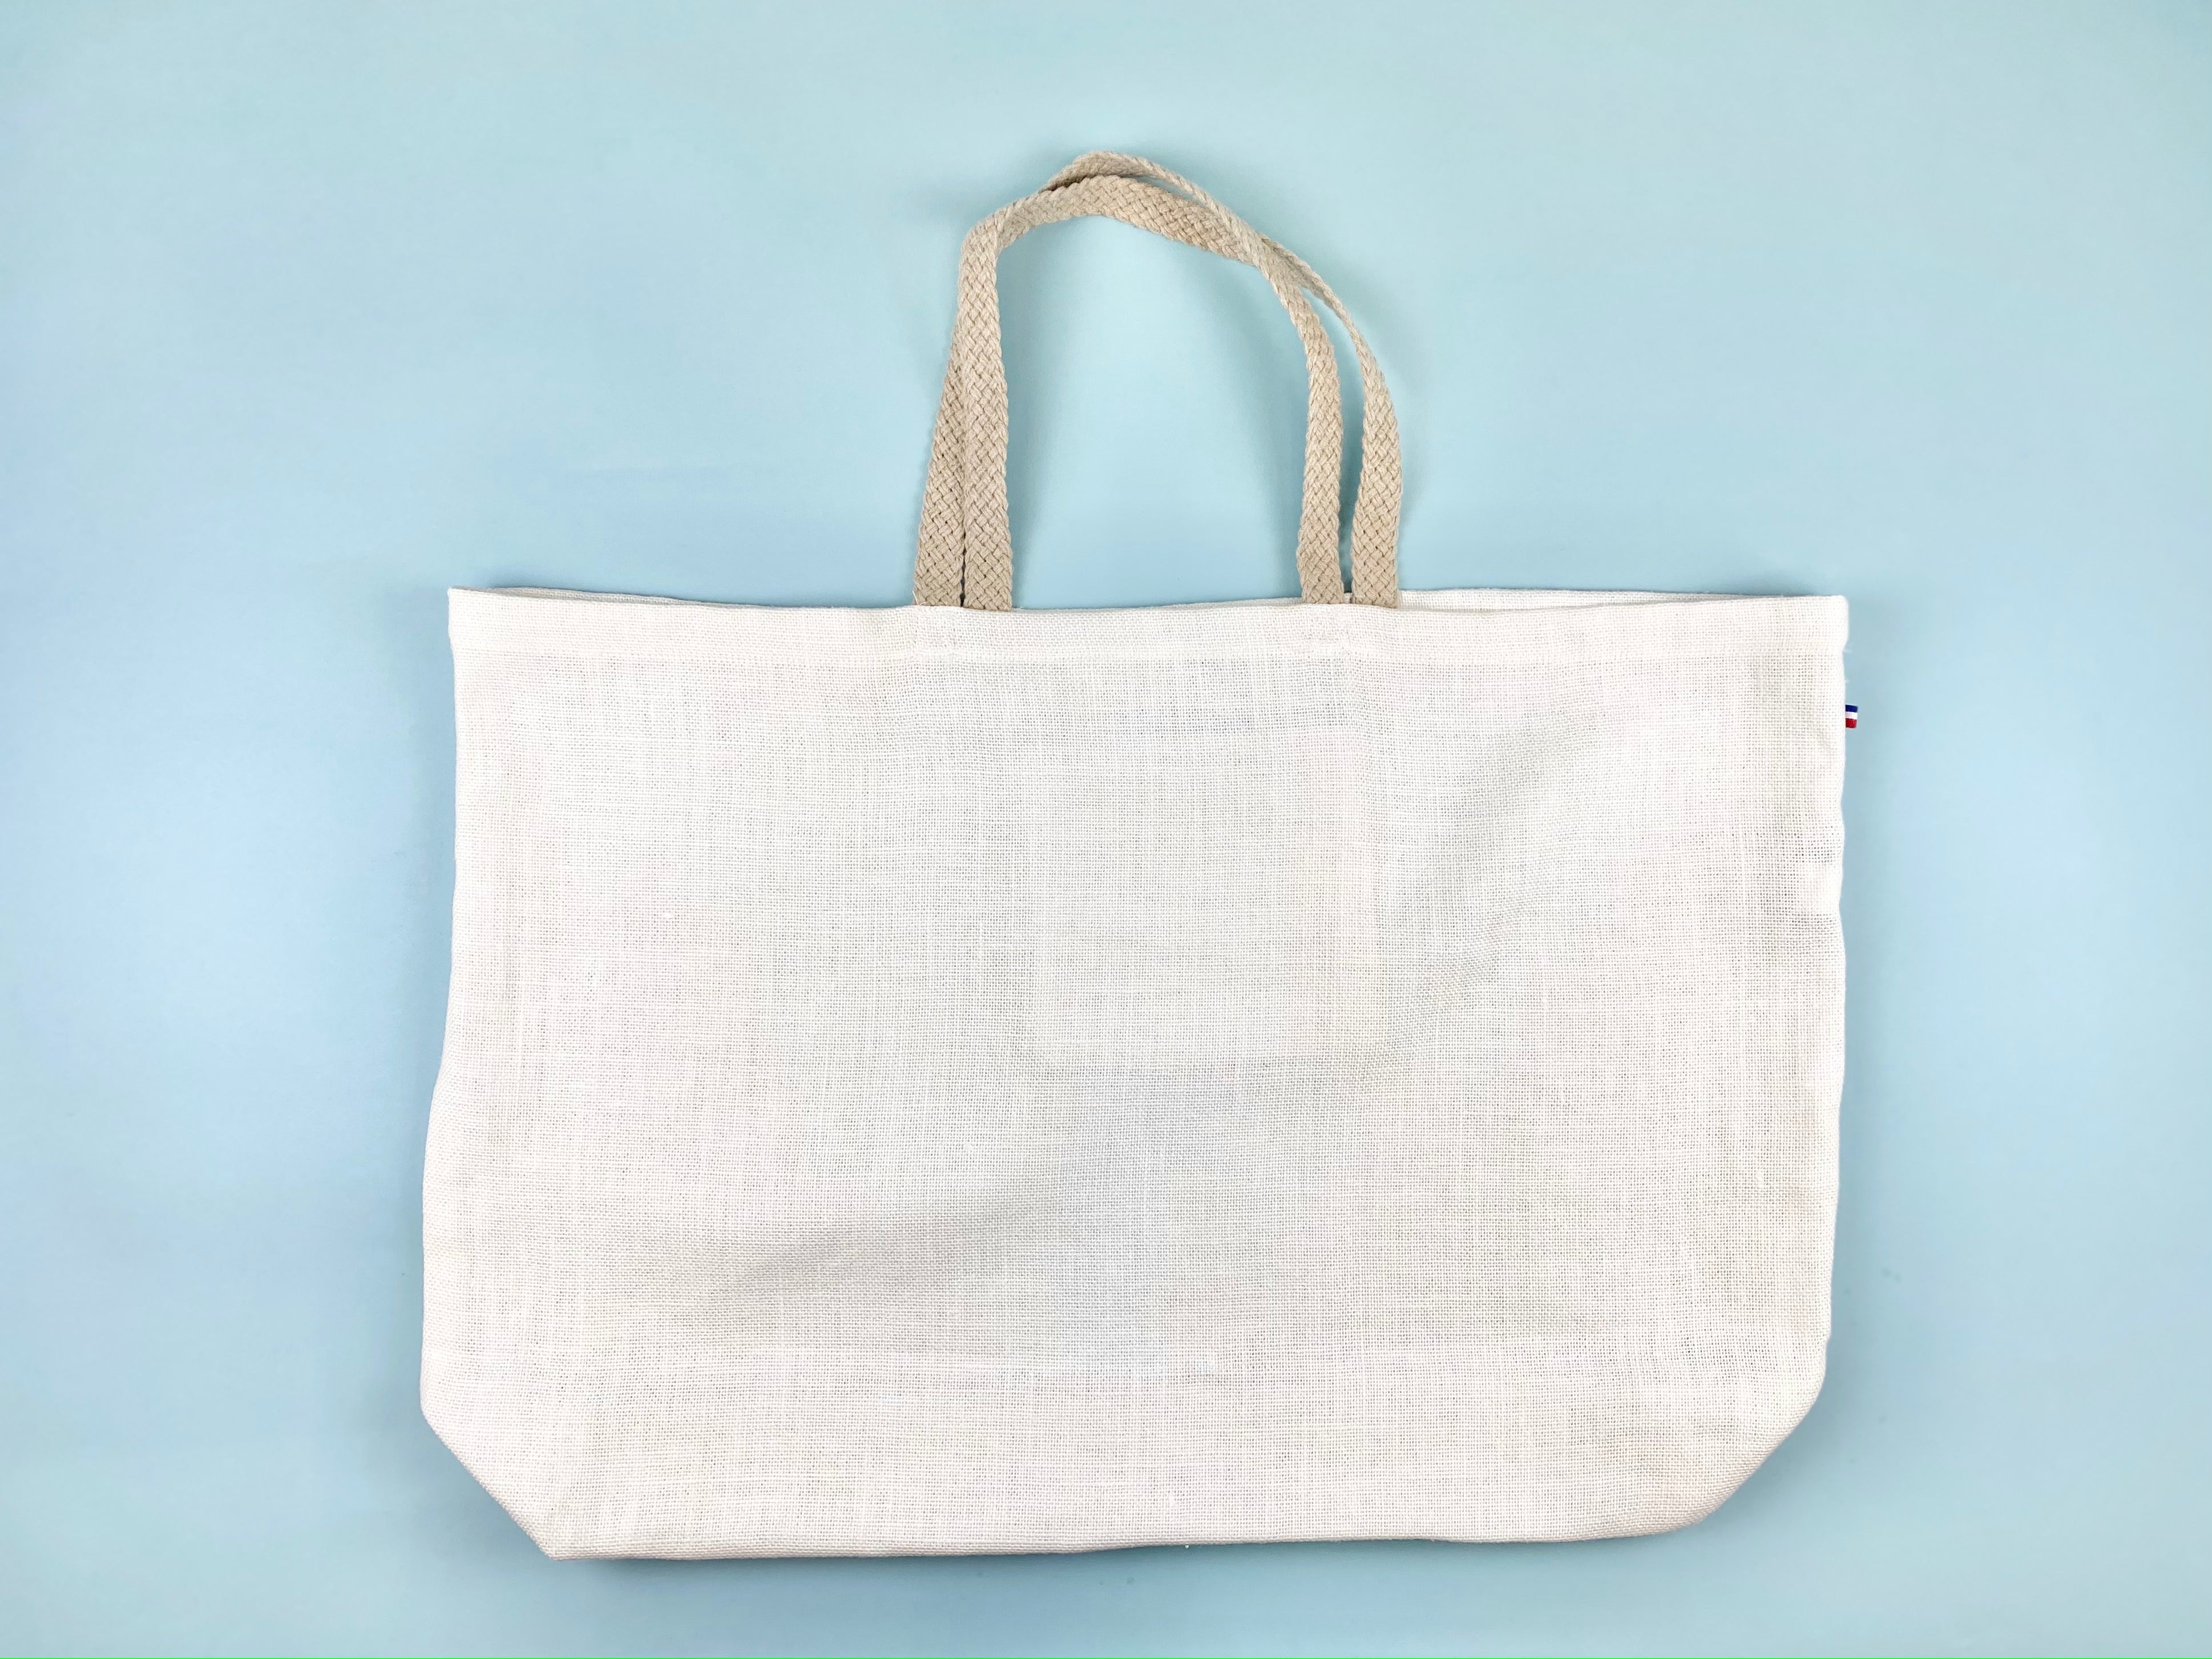 Thieffry Bagatelle Linen Tote Bag with Braided Handle and Inner Zipper Pocket Cream Textile Thieffry Brand_Thieffry New Arrivals Shopping Bags Textiles_Tote Bags Thieffry 7410-3047BagatelleCreamThieffryShoppingBag_BraidedHandle_InnerZipperPocket_55c74ffc-07b2-4e87-a64f-db0d198ce642